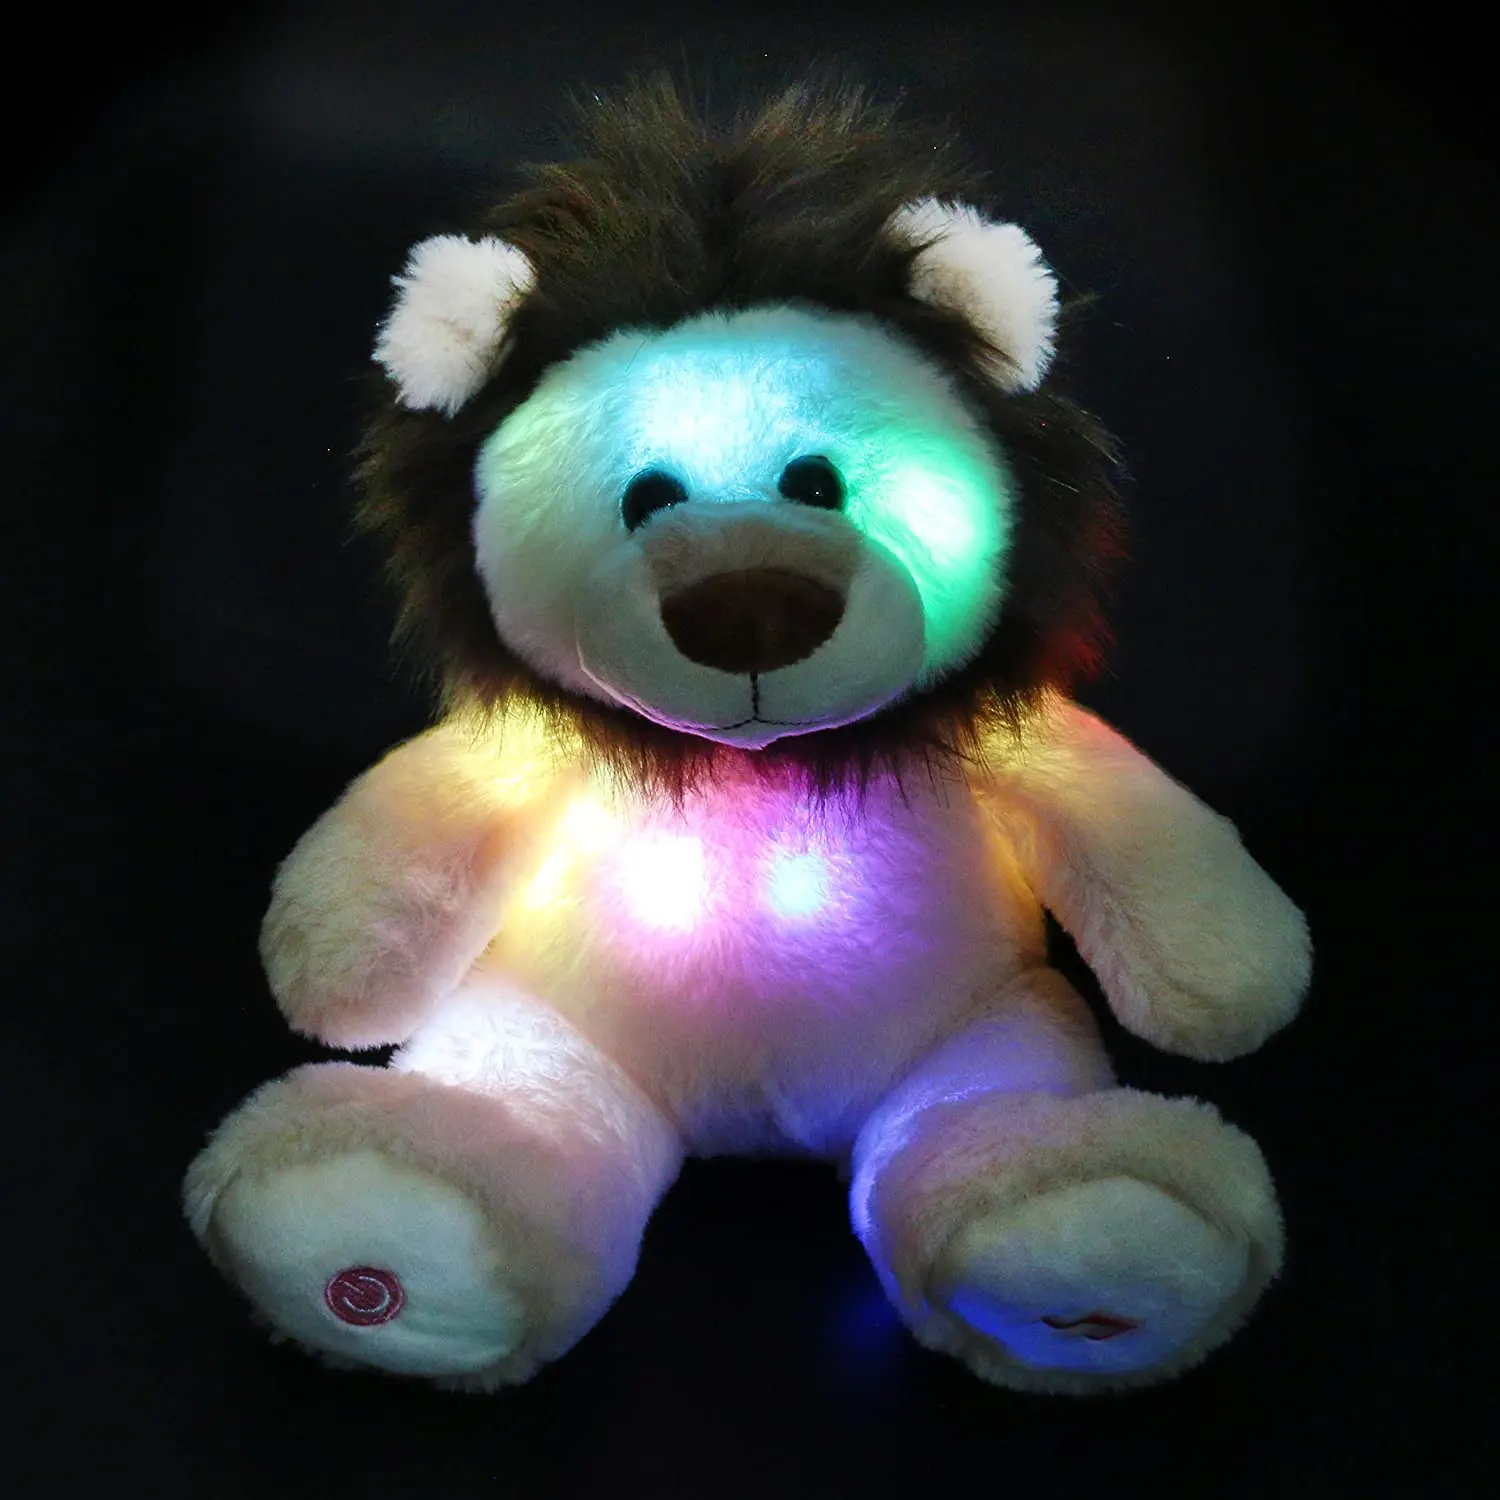 

Glow Guards Musical Light-up Stuffed Animals Koala LED Singing Soft Plush Toy with Night Lights Lullabies Birthday Gifts for Kid